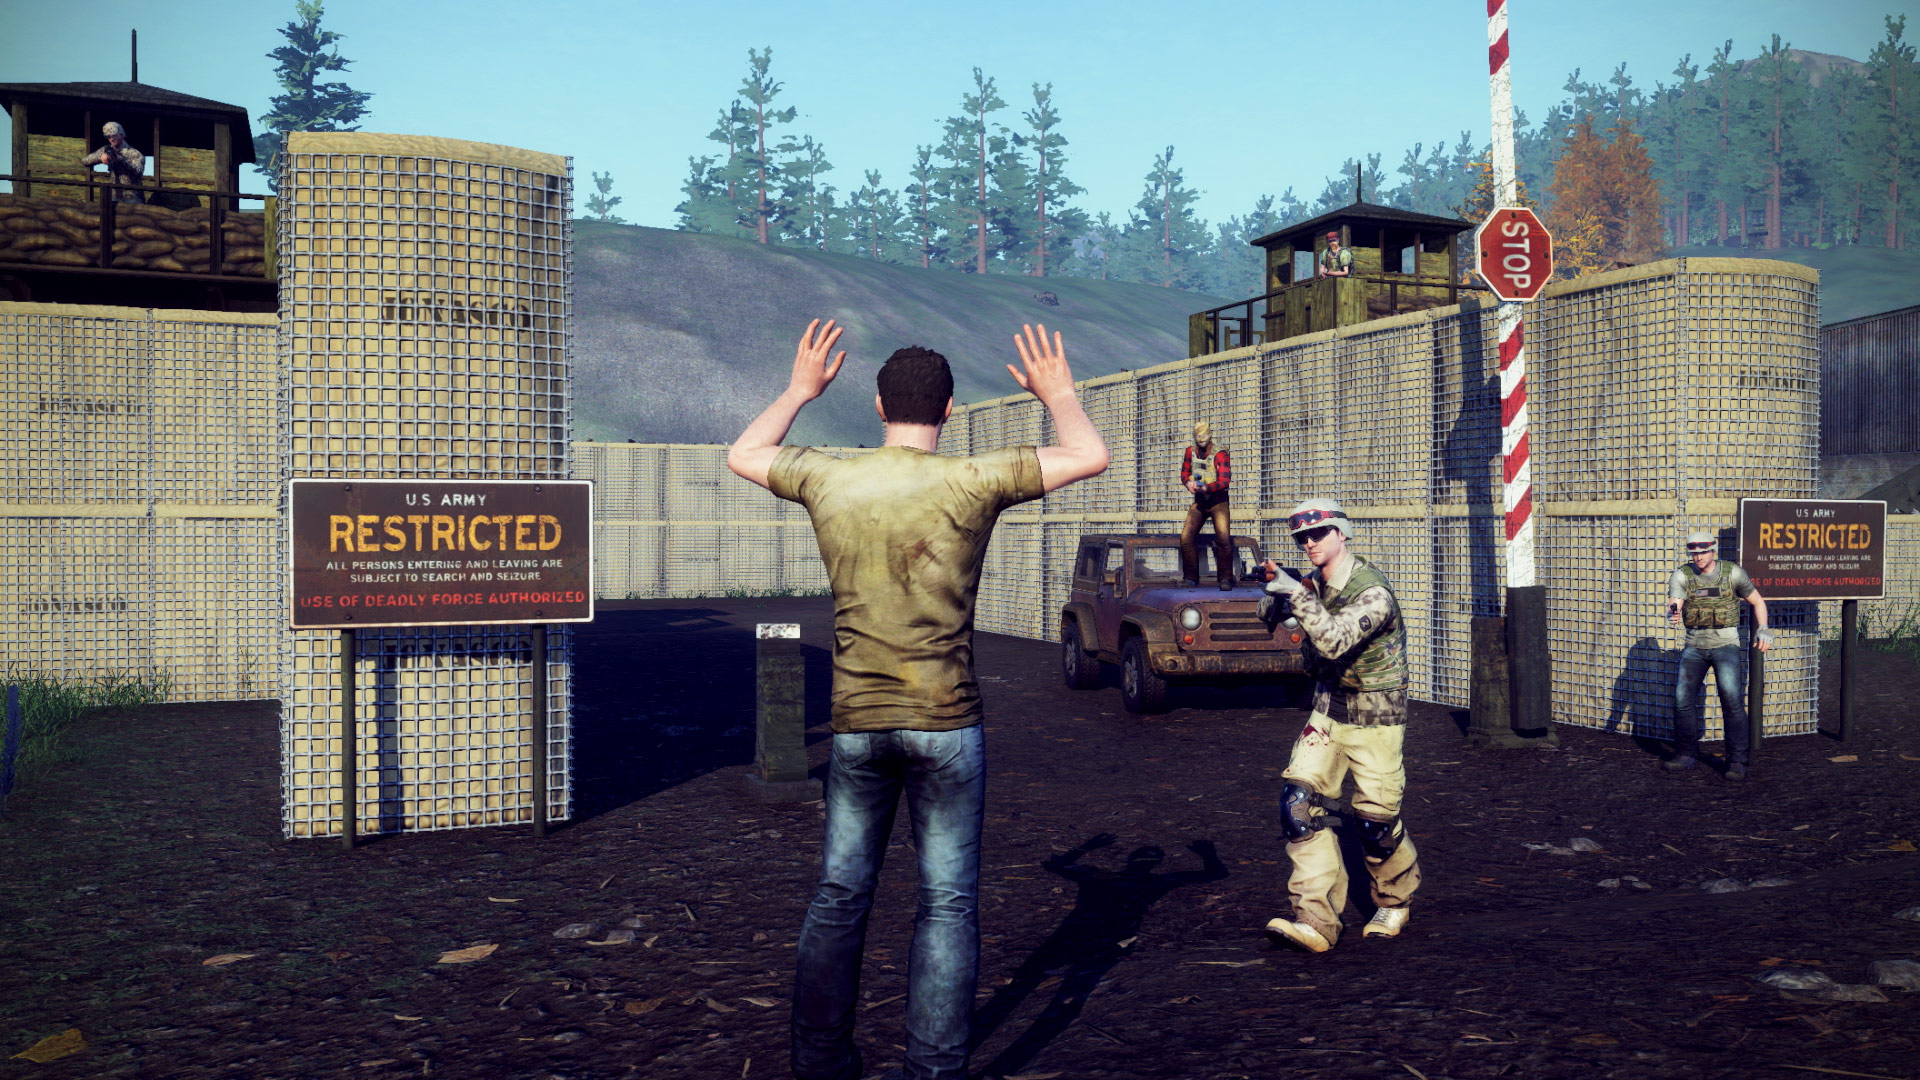 Мод here. H1z1: just Survive. H1z1: King of the Kill. DAYZ h1z1. H1z1.